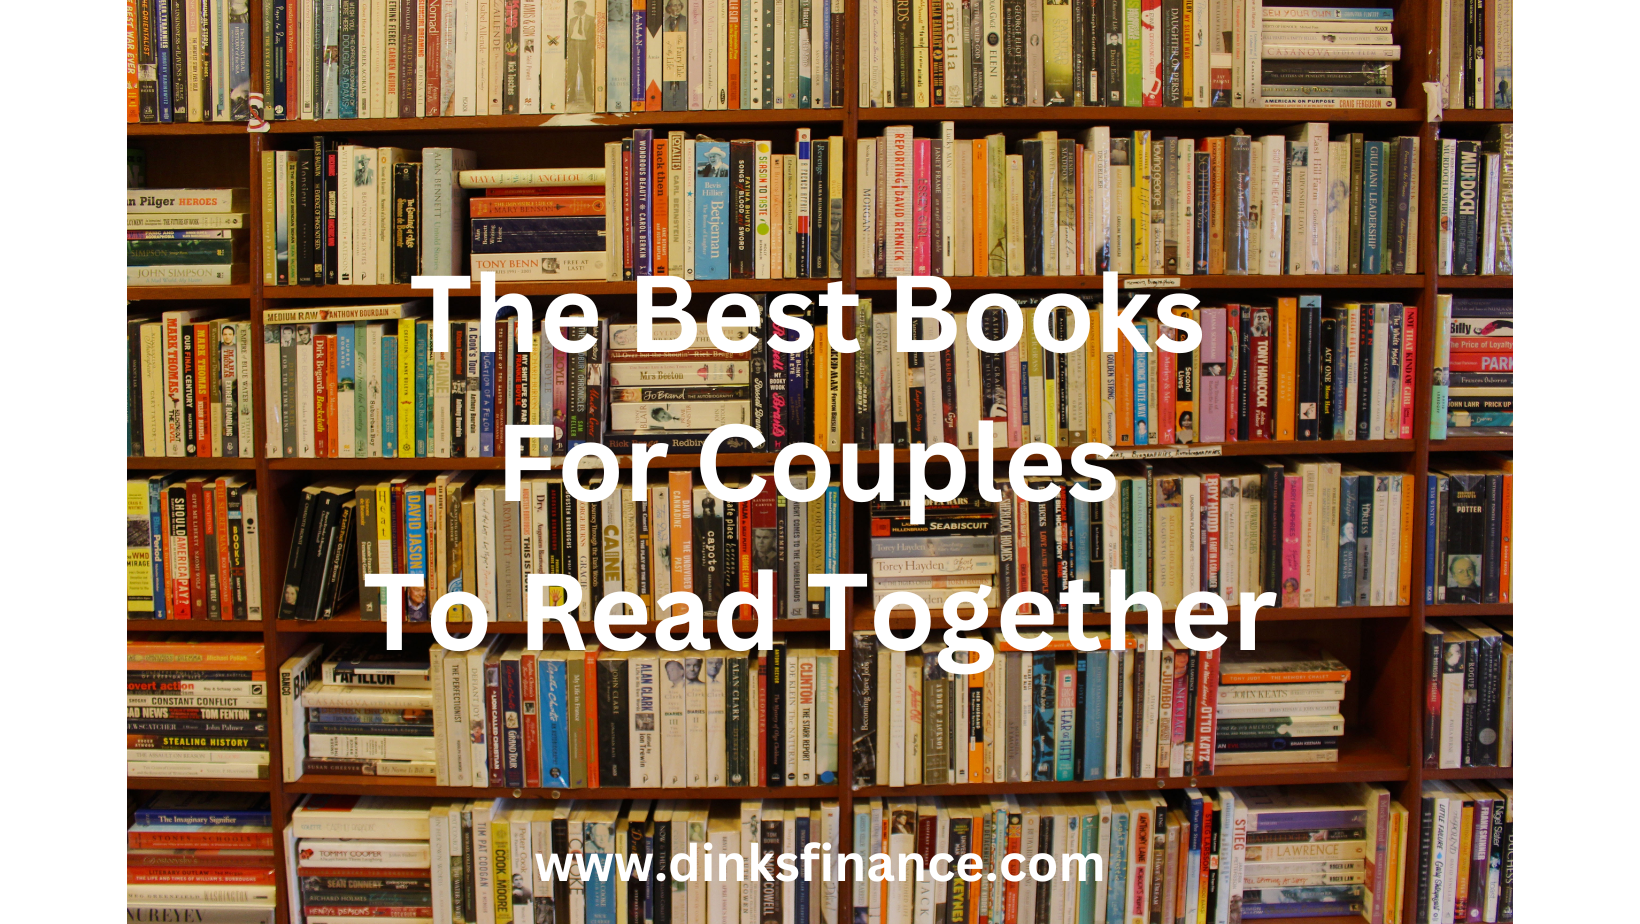 he Best Books For Couples To Read Together: bookshelf with text on it.